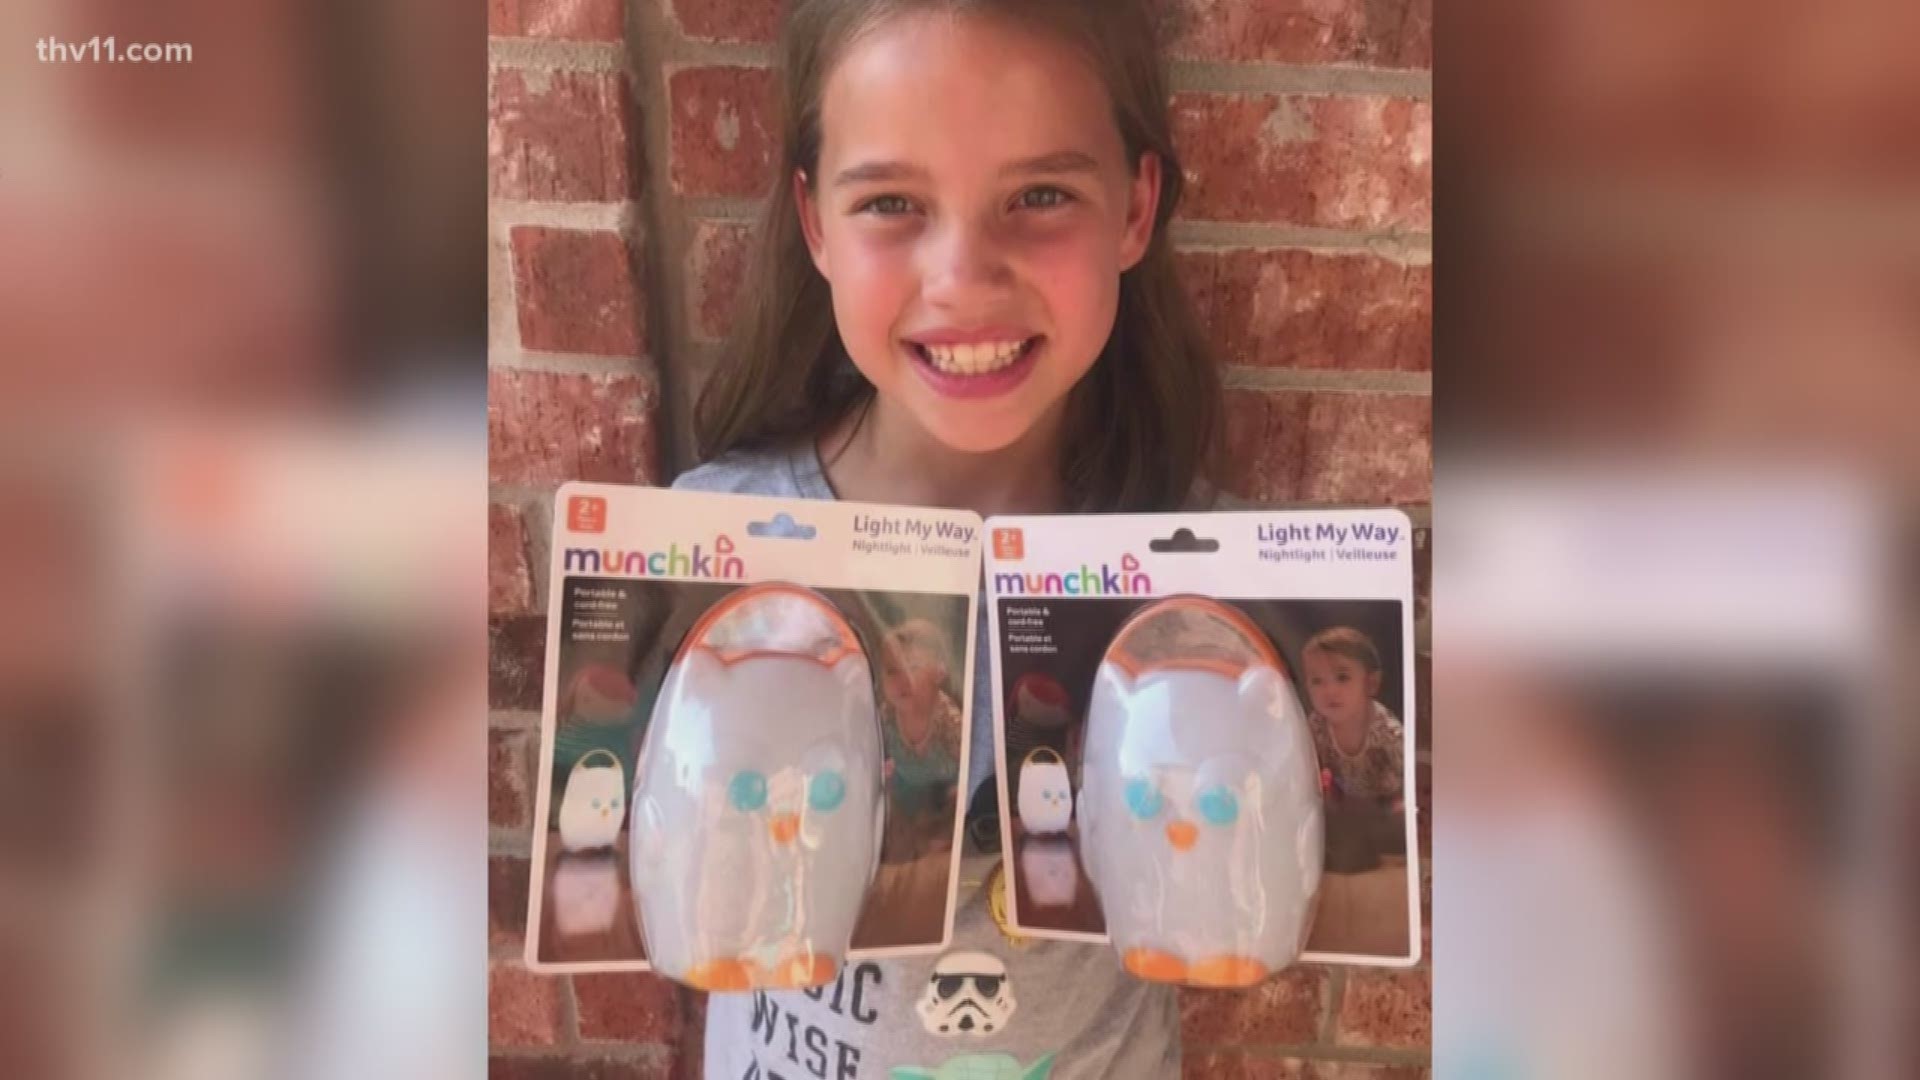 You may remember Amelia Lisowe, she's the 8-year-old from Bryant collecting night lights for foster children. Well, one company saw Ameilia's project and wanted to help.